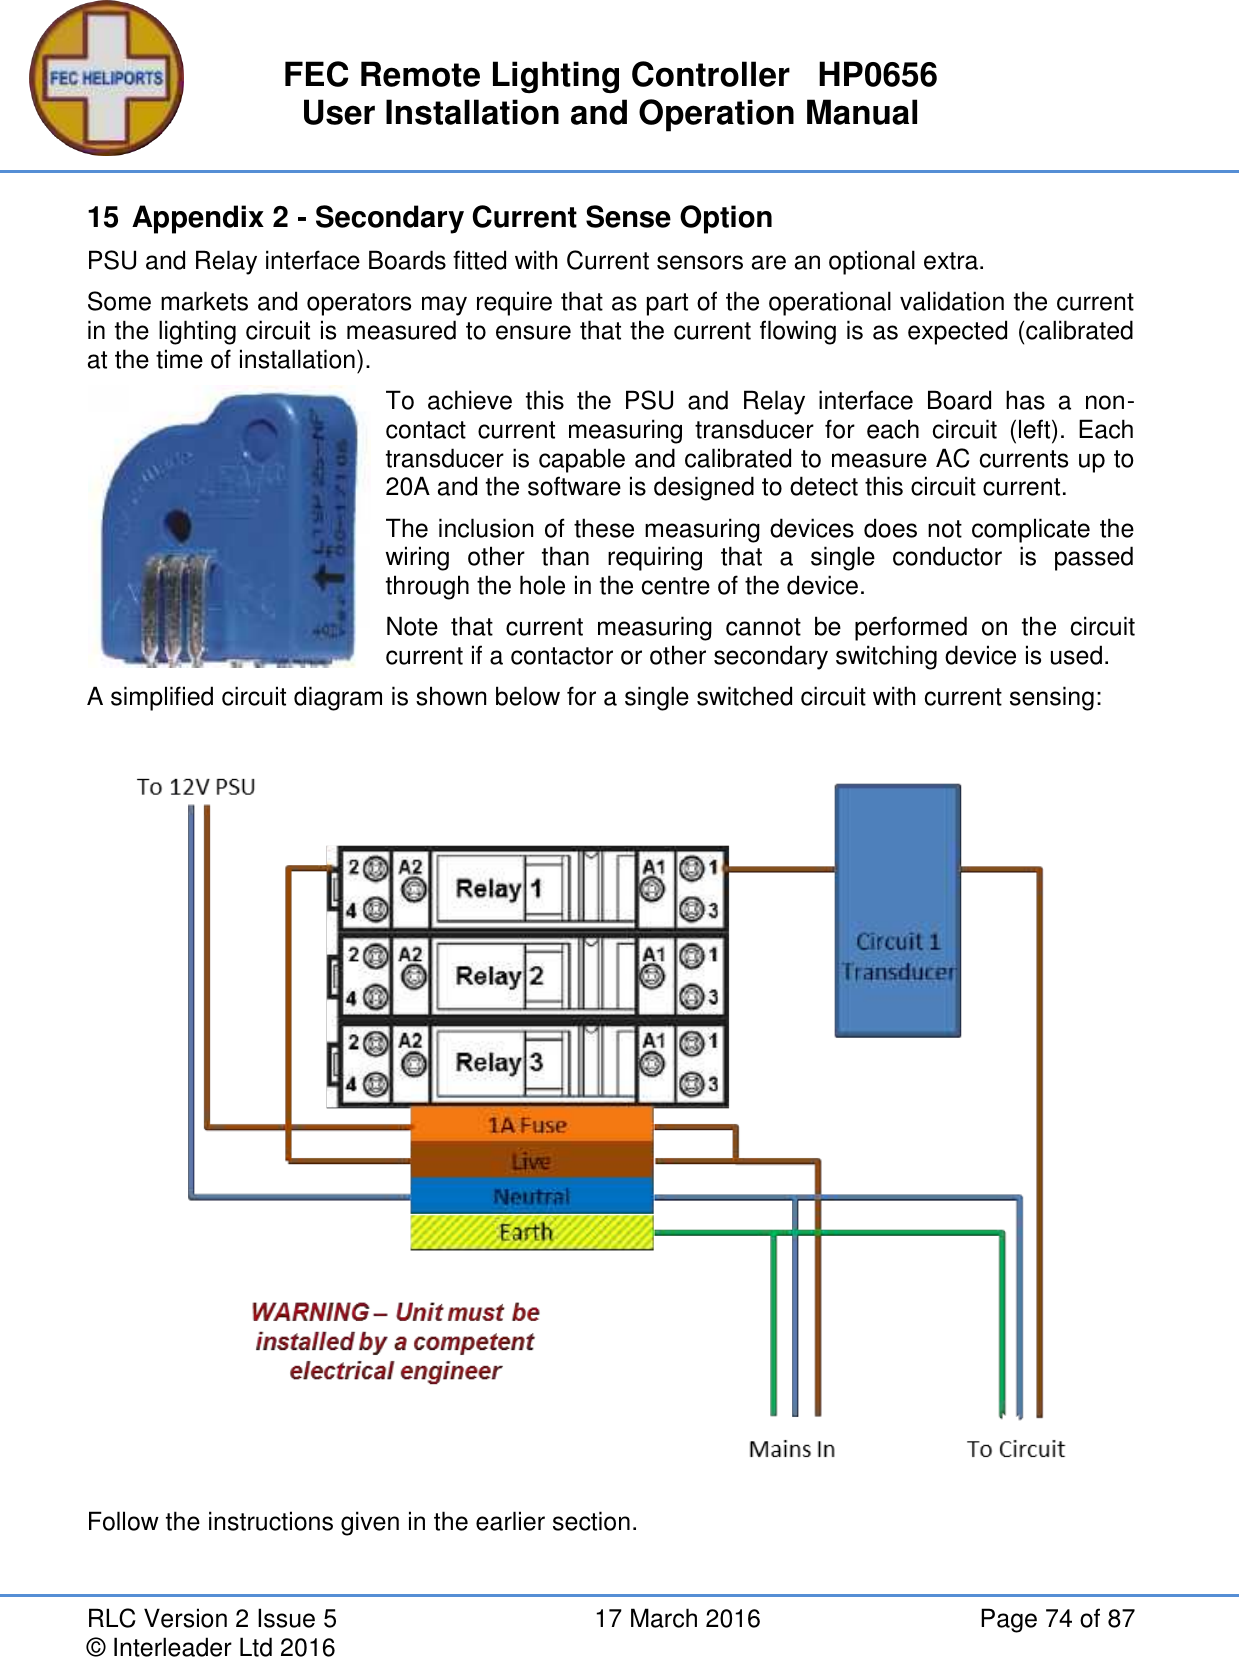 FEC Remote Lighting Controller   HP0656 User Installation and Operation Manual RLC Version 2 Issue 5  17 March 2016  Page 74 of 87 © Interleader Ltd 2016 15 Appendix 2 - Secondary Current Sense Option PSU and Relay interface Boards fitted with Current sensors are an optional extra. Some markets and operators may require that as part of the operational validation the current in the lighting circuit is measured to ensure that the current flowing is as expected (calibrated at the time of installation). To  achieve  this  the  PSU  and  Relay  interface  Board  has  a  non-contact  current  measuring  transducer  for  each  circuit  (left).  Each transducer is capable and calibrated to measure AC currents up to 20A and the software is designed to detect this circuit current. The inclusion of these measuring devices does not complicate the wiring  other  than  requiring  that  a  single  conductor  is  passed through the hole in the centre of the device. Note  that  current  measuring  cannot  be  performed  on  the  circuit current if a contactor or other secondary switching device is used.  A simplified circuit diagram is shown below for a single switched circuit with current sensing:                    Follow the instructions given in the earlier section.  